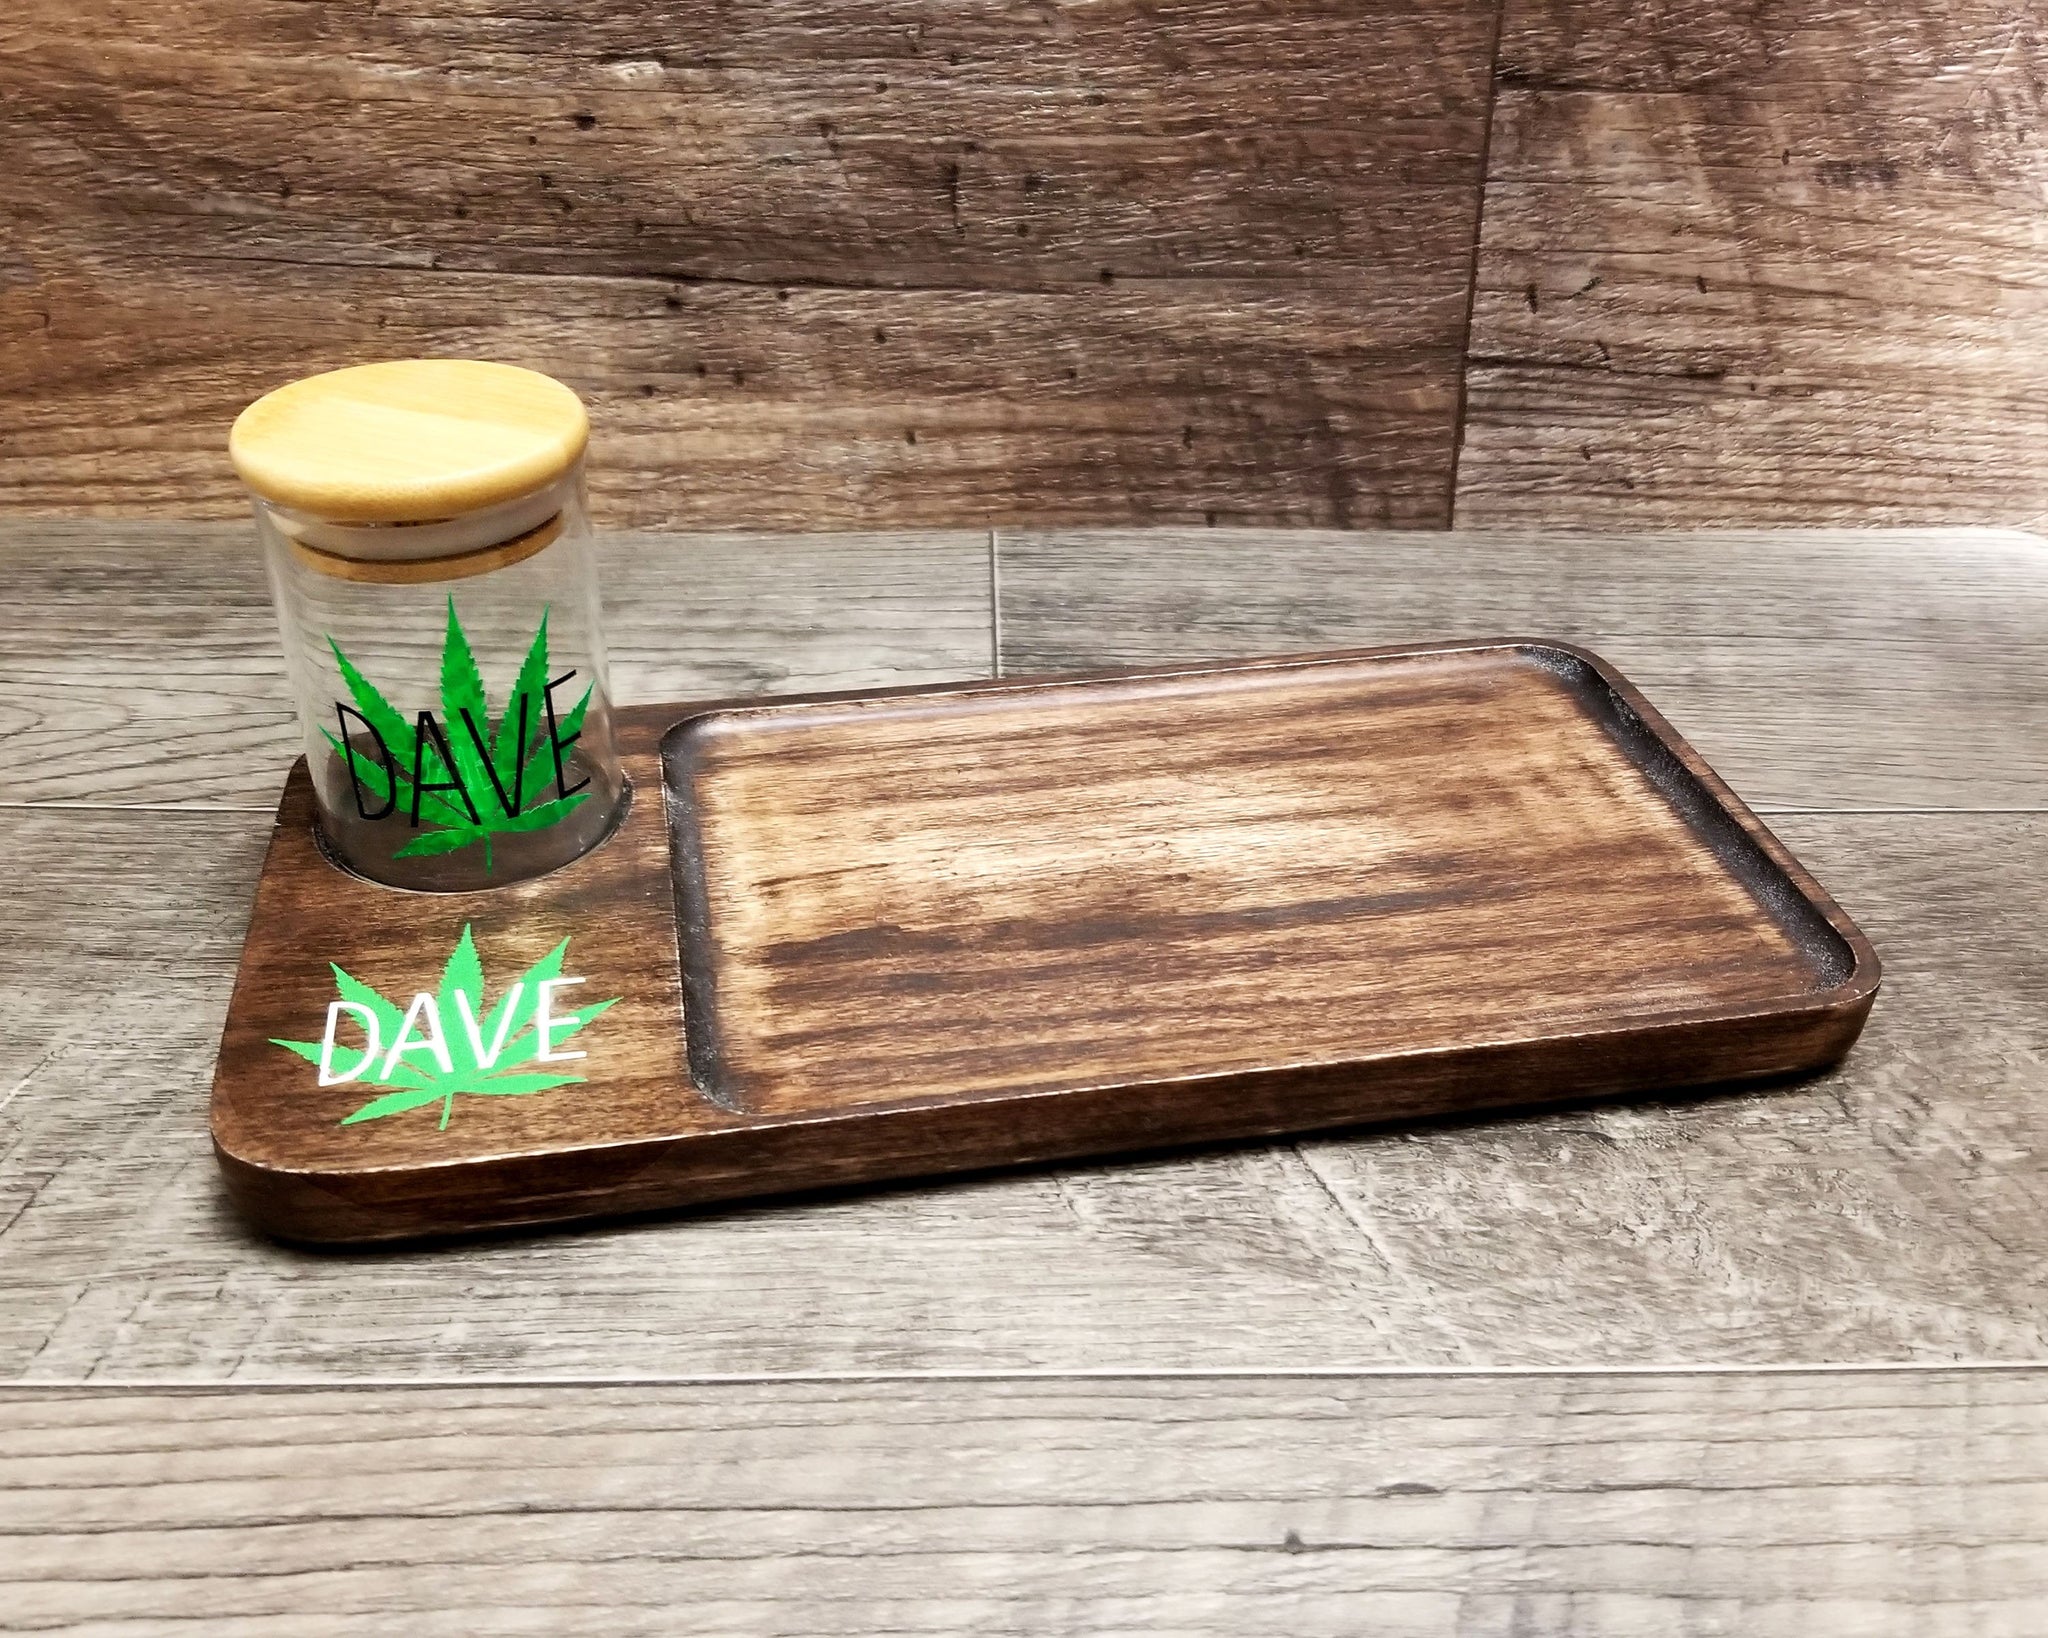 Rolling Tray Set with Wood Rolling Tray and Glass Stash Jar